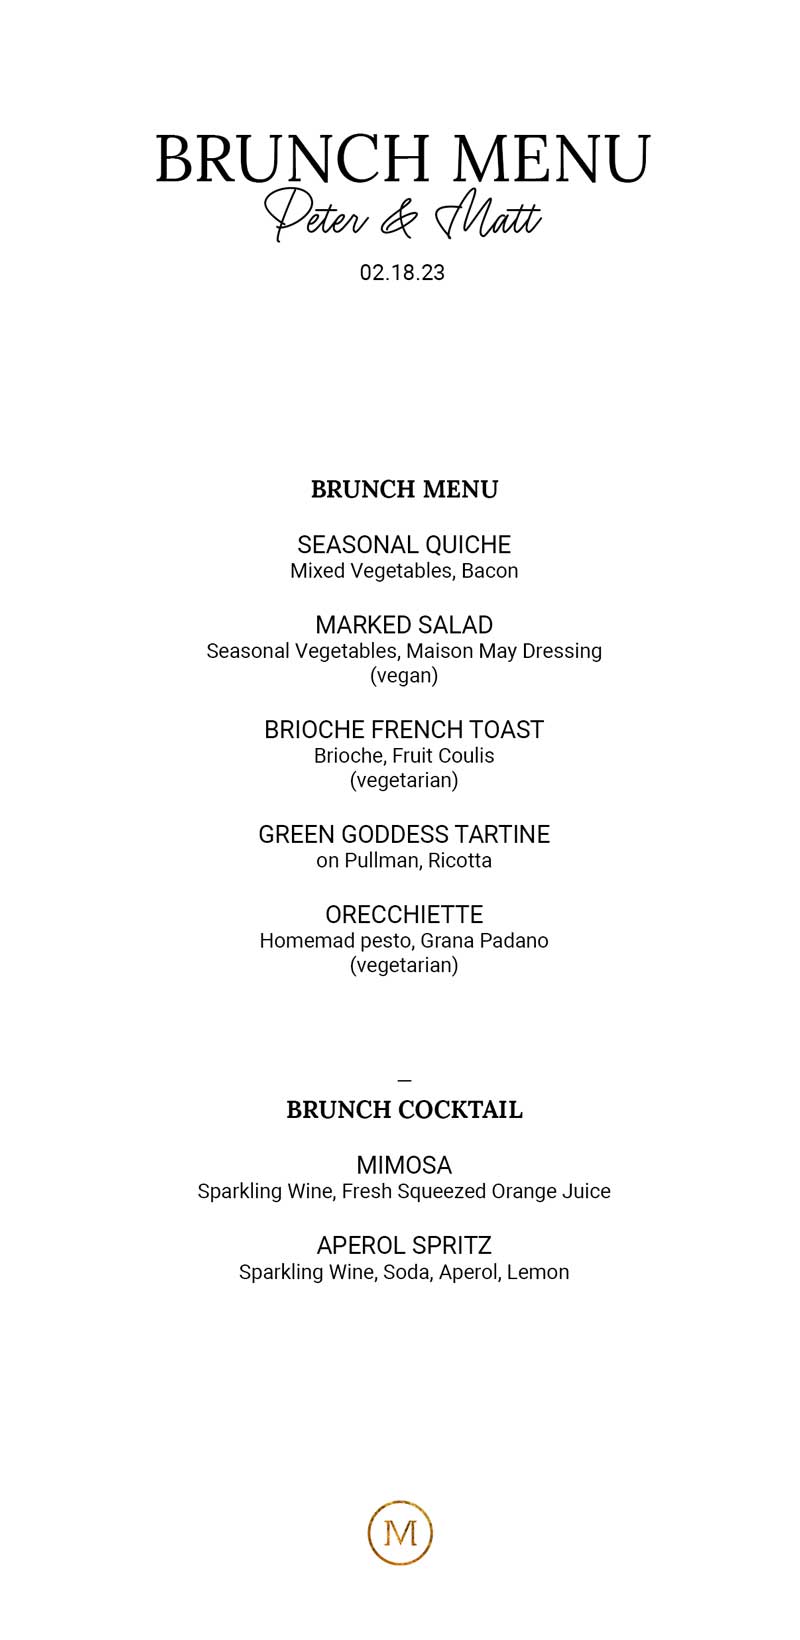 Maison Mays Brunch Event Sample menu caters to all needs.